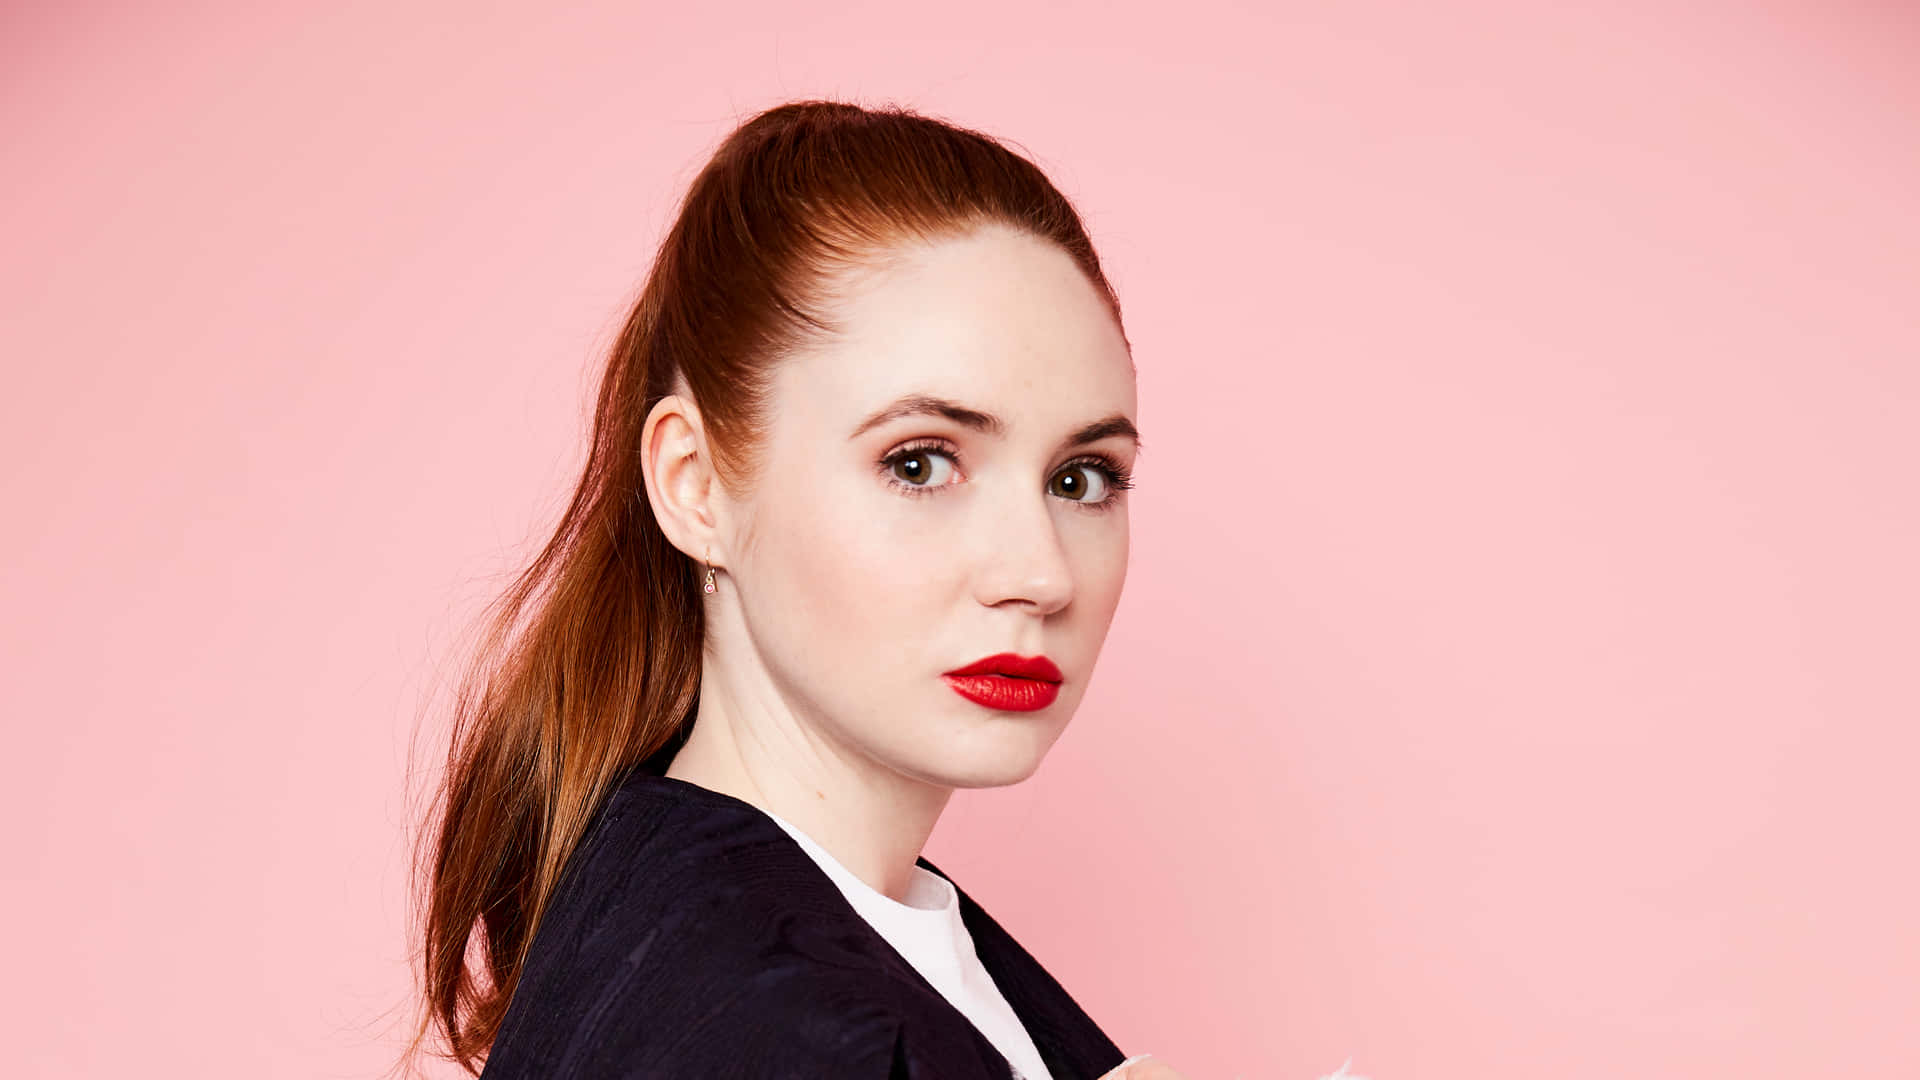 British actress Karen Gillan graces the cover of Marie Claire February 2021. Wallpaper